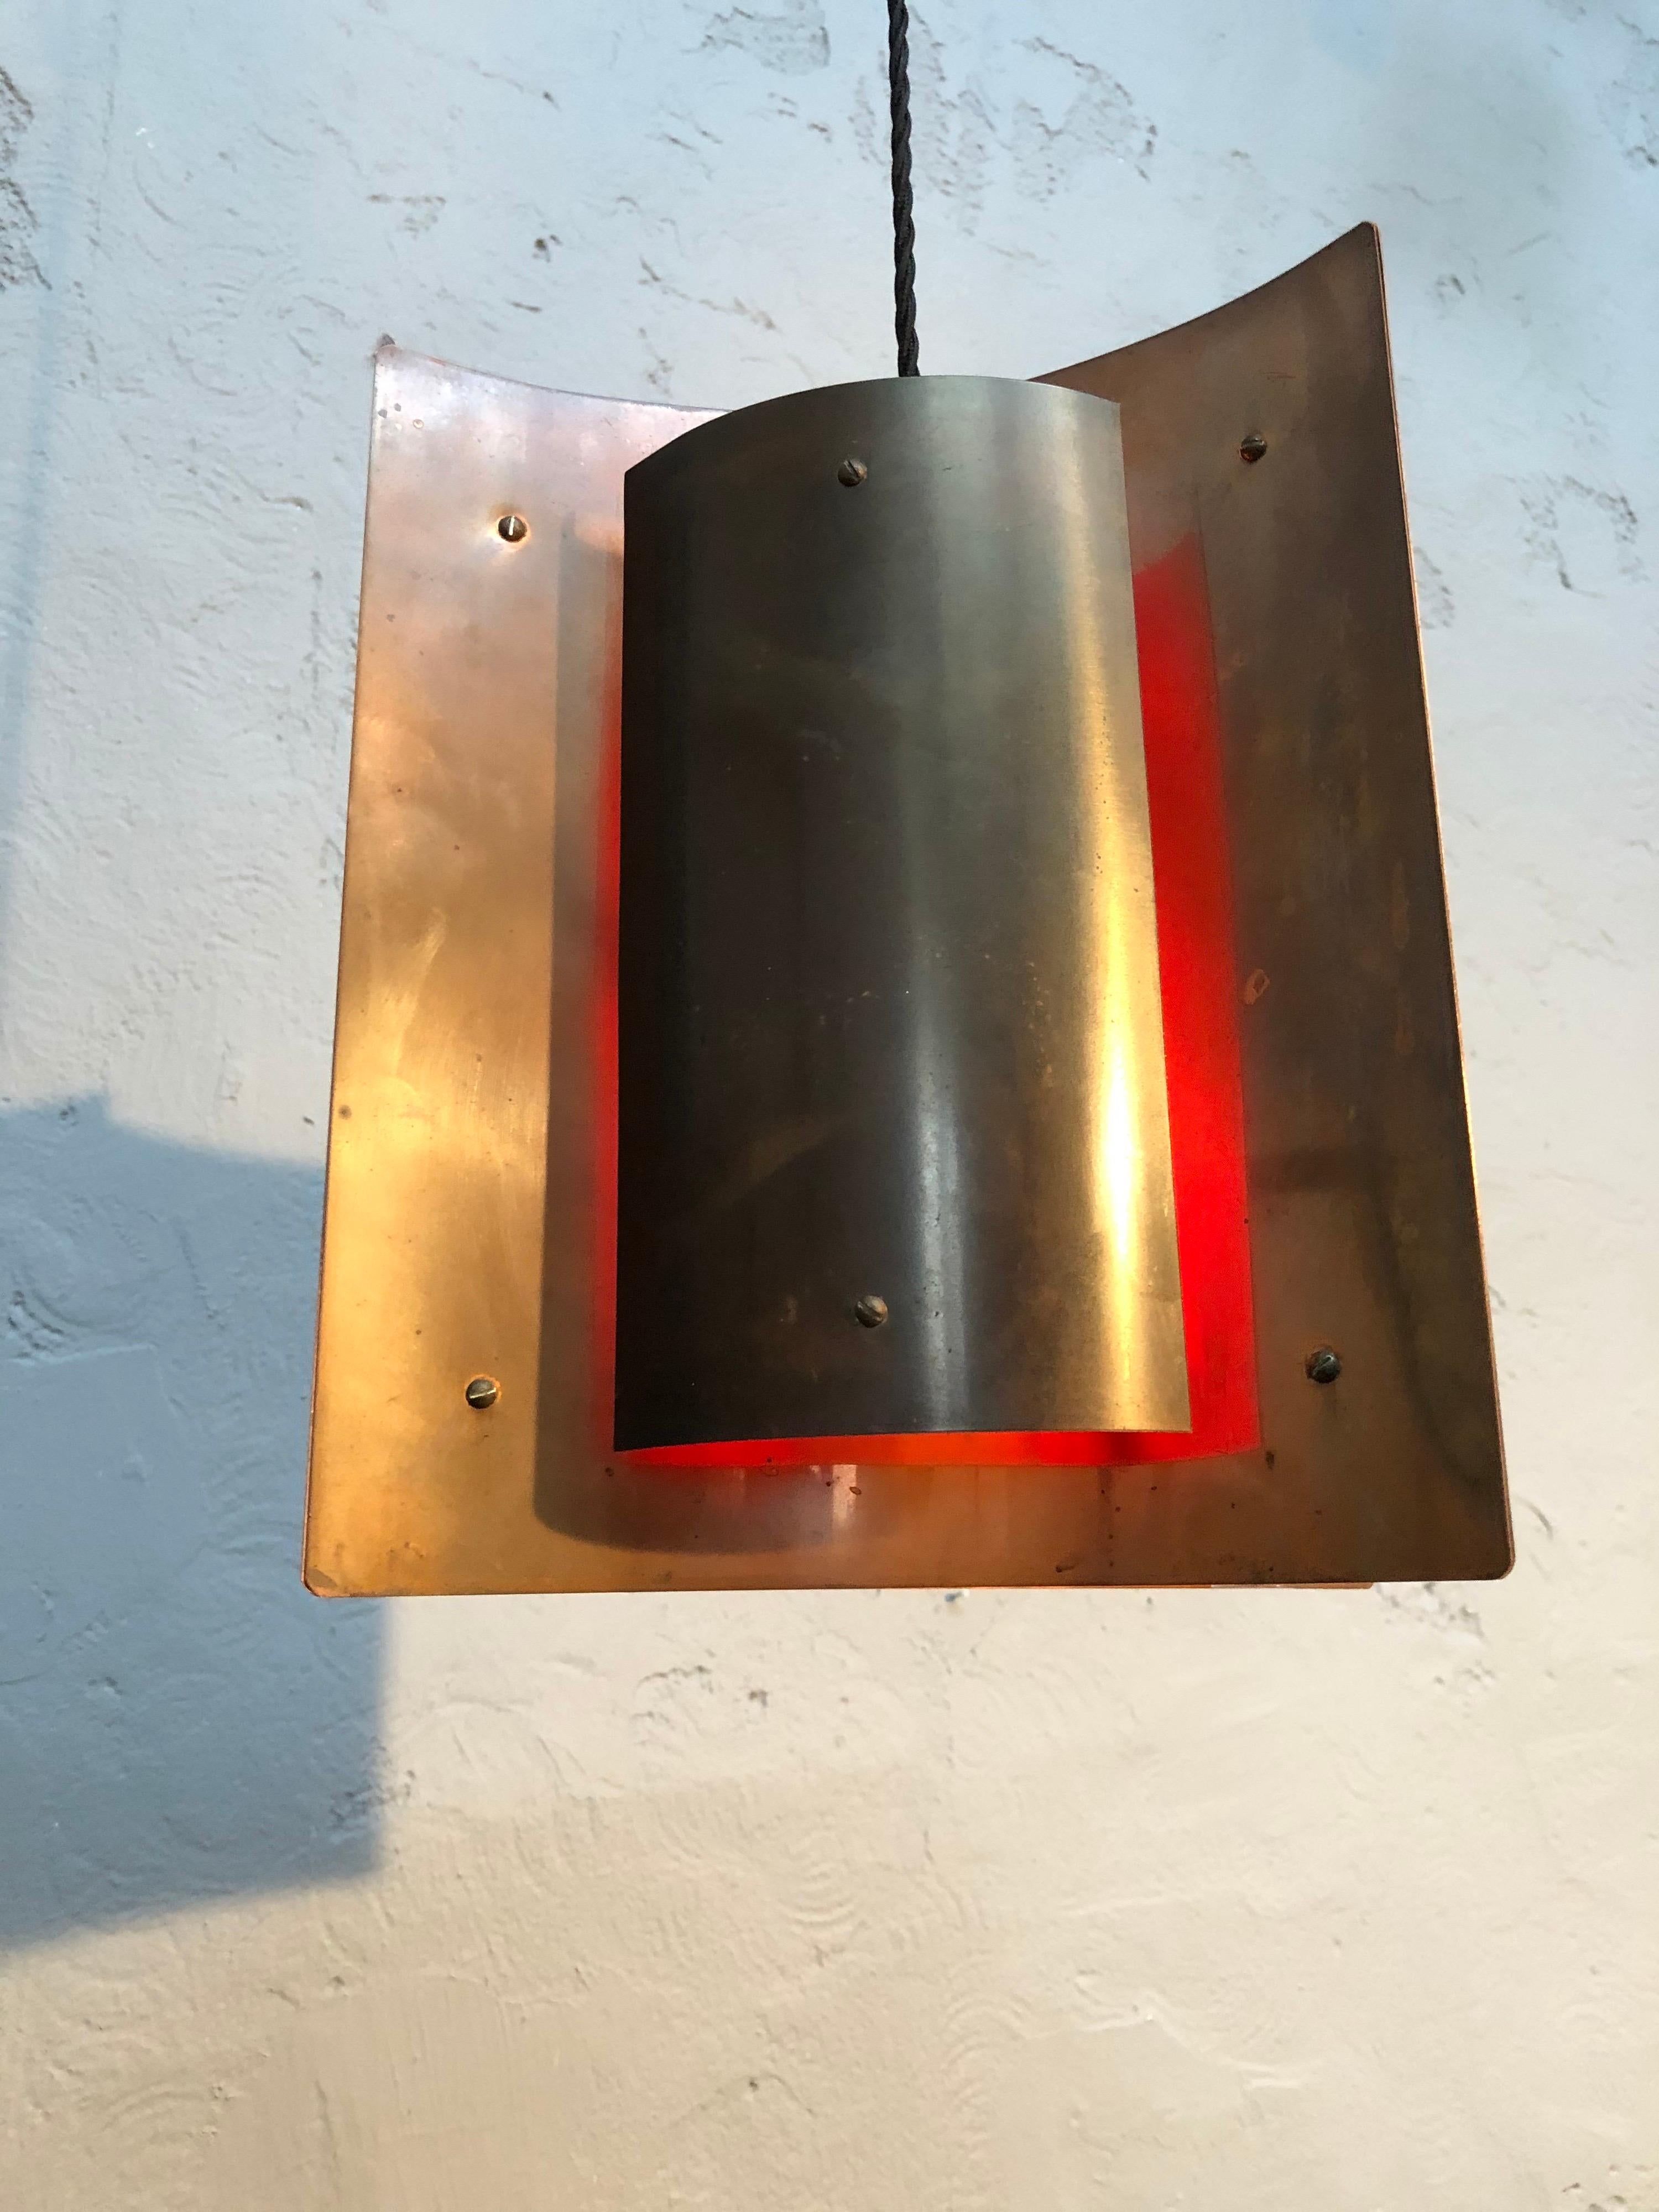 Beautiful midcentury Danish pendant ceiling lamp in copper. 
A 4 sided pendant made up of matching pieces of copper with a copper defuser mounted onto the middle which are painted red on the inside to give a lovely warm glow to the pendant. 
All